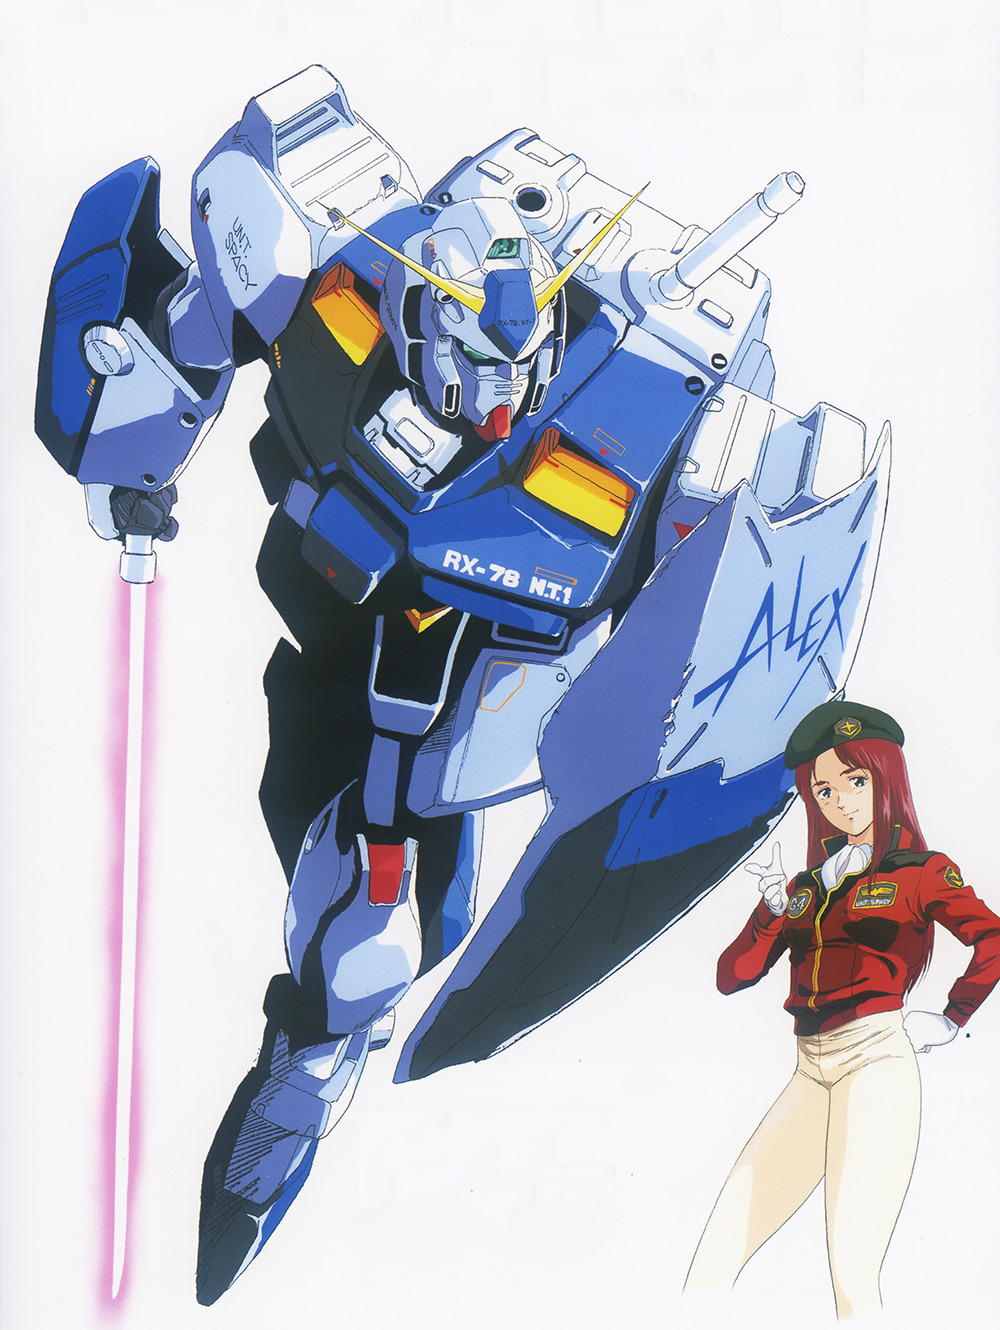 1980s_(style) 1girl beam_saber beret character_name christina_mackenzie earth_federation_space_forces gloves gundam gundam_0080 gundam_alex hat highres jacket kawamoto_toshihiro key_visual long_hair mecha military military_uniform mobile_suit official_art pants pilot production_art promotional_art redhead retro_artstyle robot scan scarf science_fiction shield soldier traditional_media uniform v-fin white_gloves white_pants white_scarf